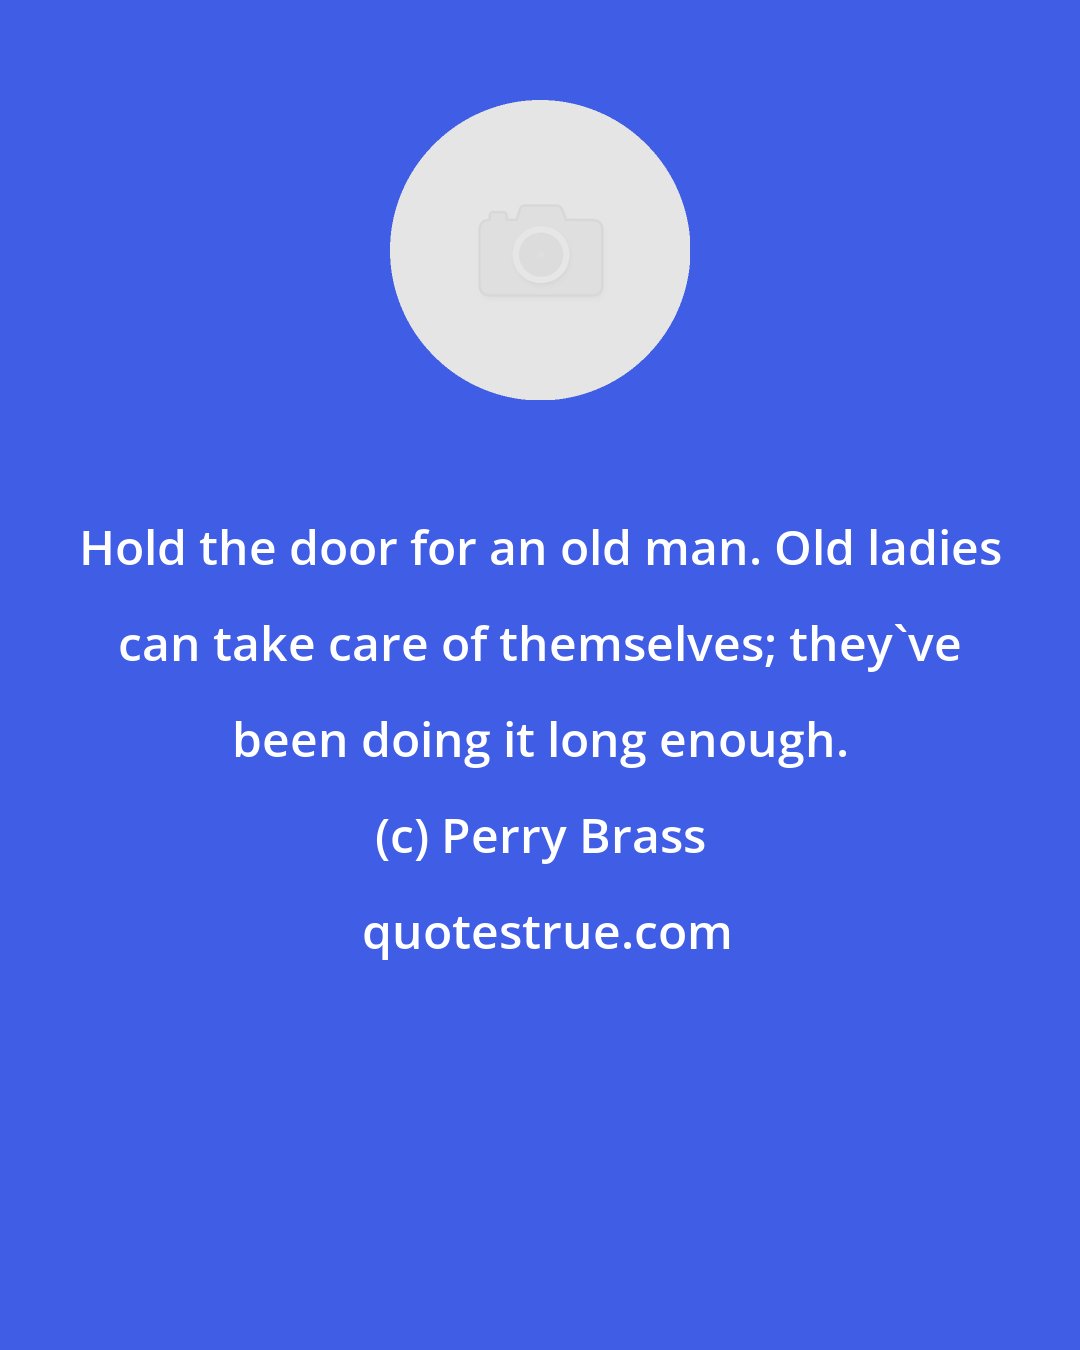 Perry Brass: Hold the door for an old man. Old ladies can take care of themselves; they've been doing it long enough.